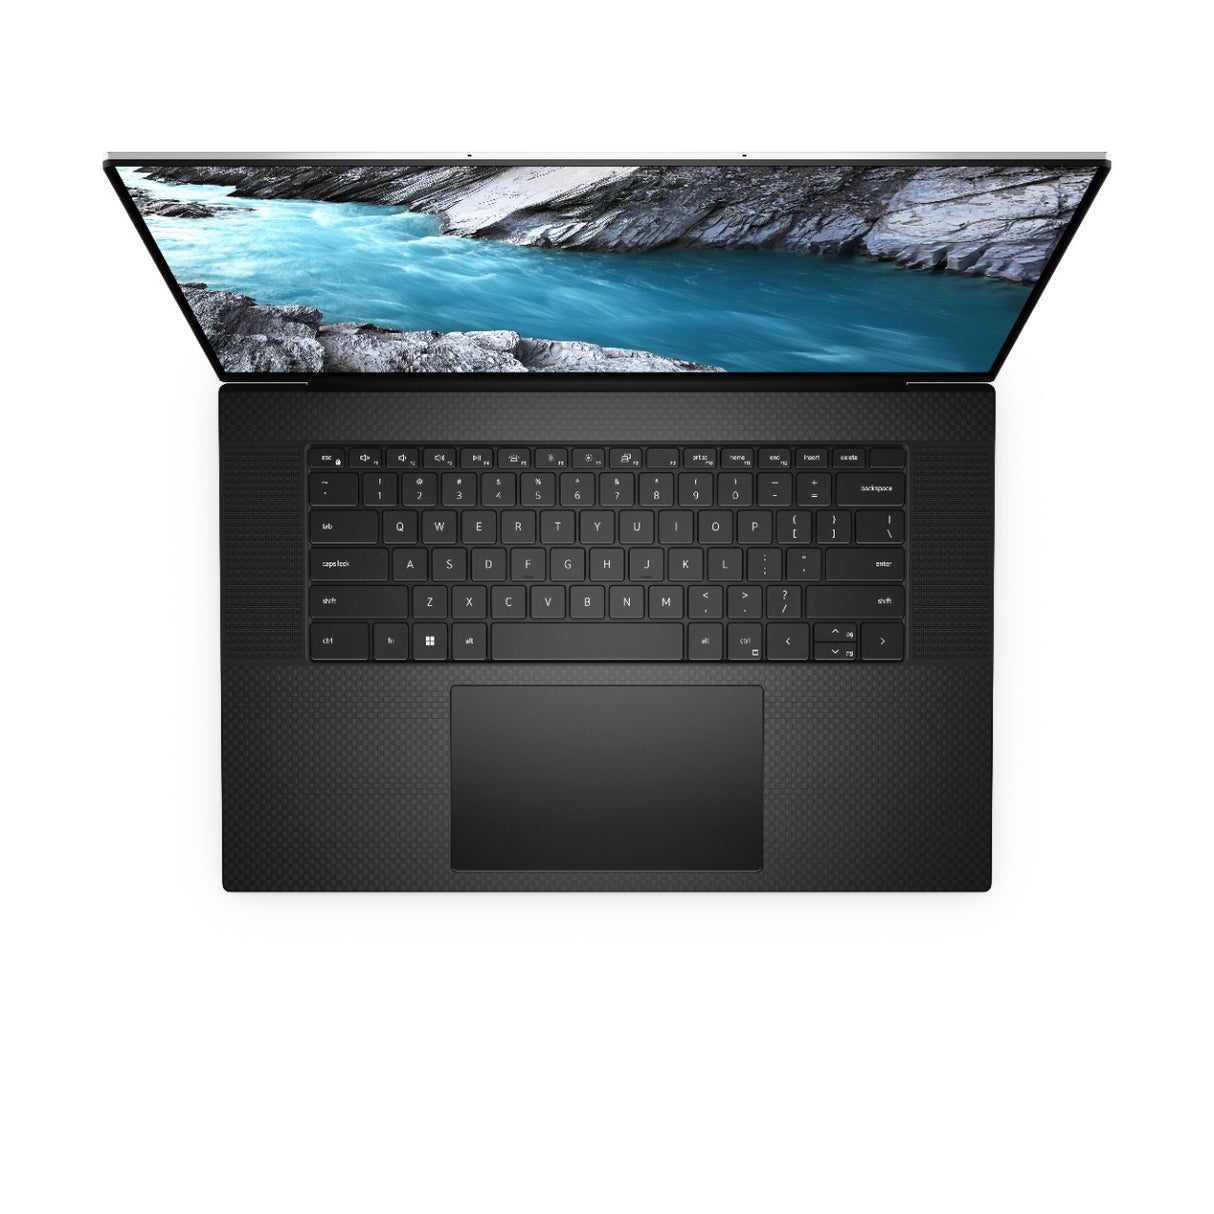 DELL XPS 17 9730 17" UHD+ NOTEBOOK